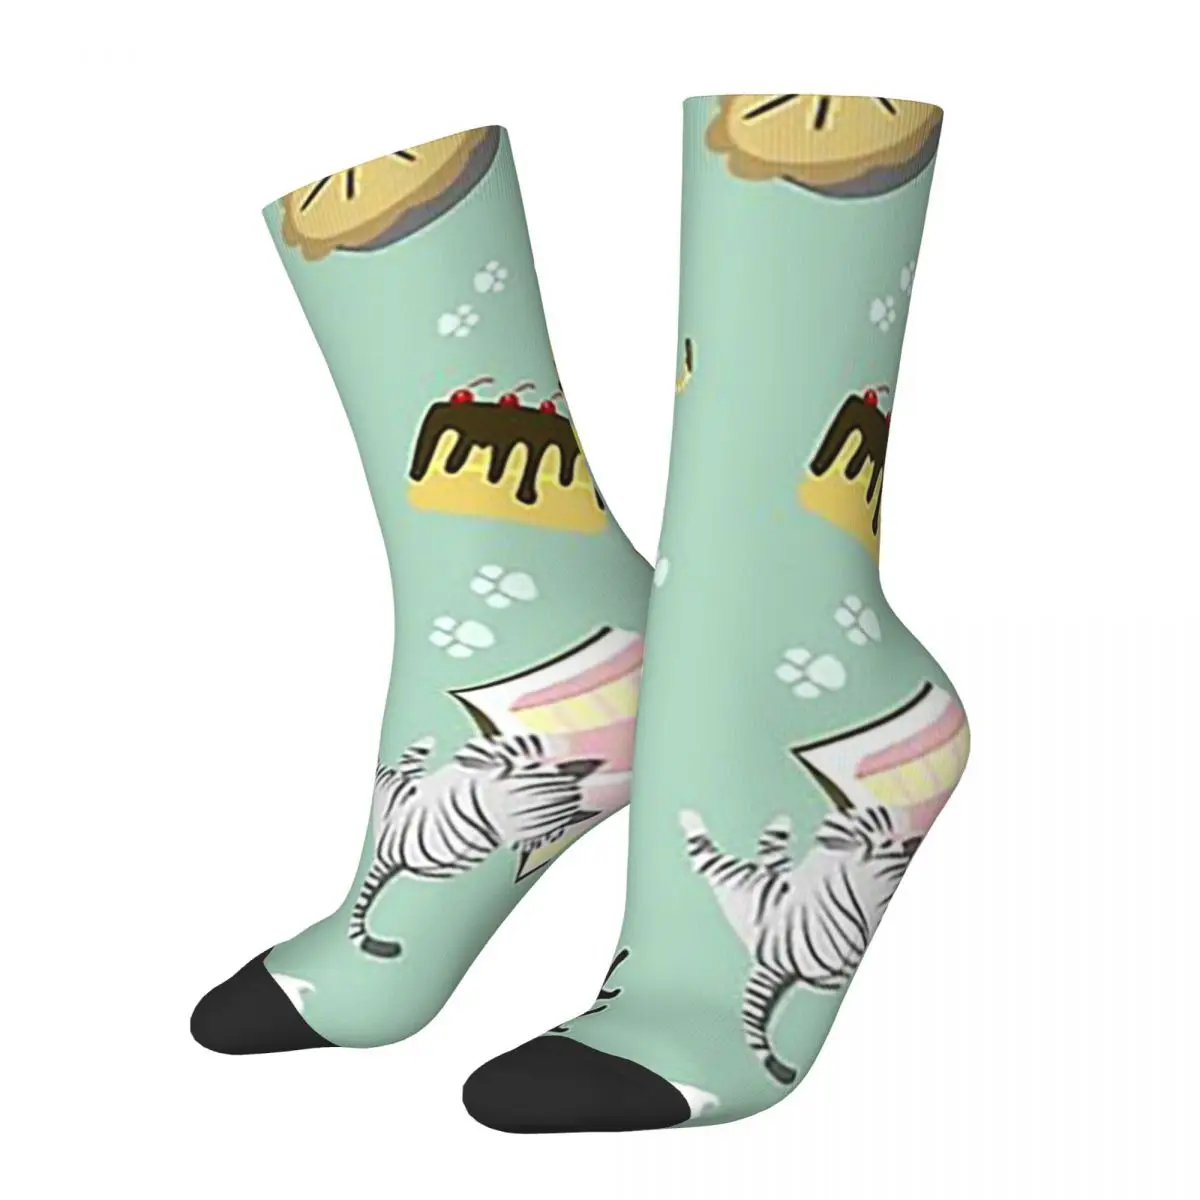 

Cats Baking Cakes And Other Sweets Socks Harajuku Super Soft Stockings All Season Long Socks Accessories for Unisex Gifts